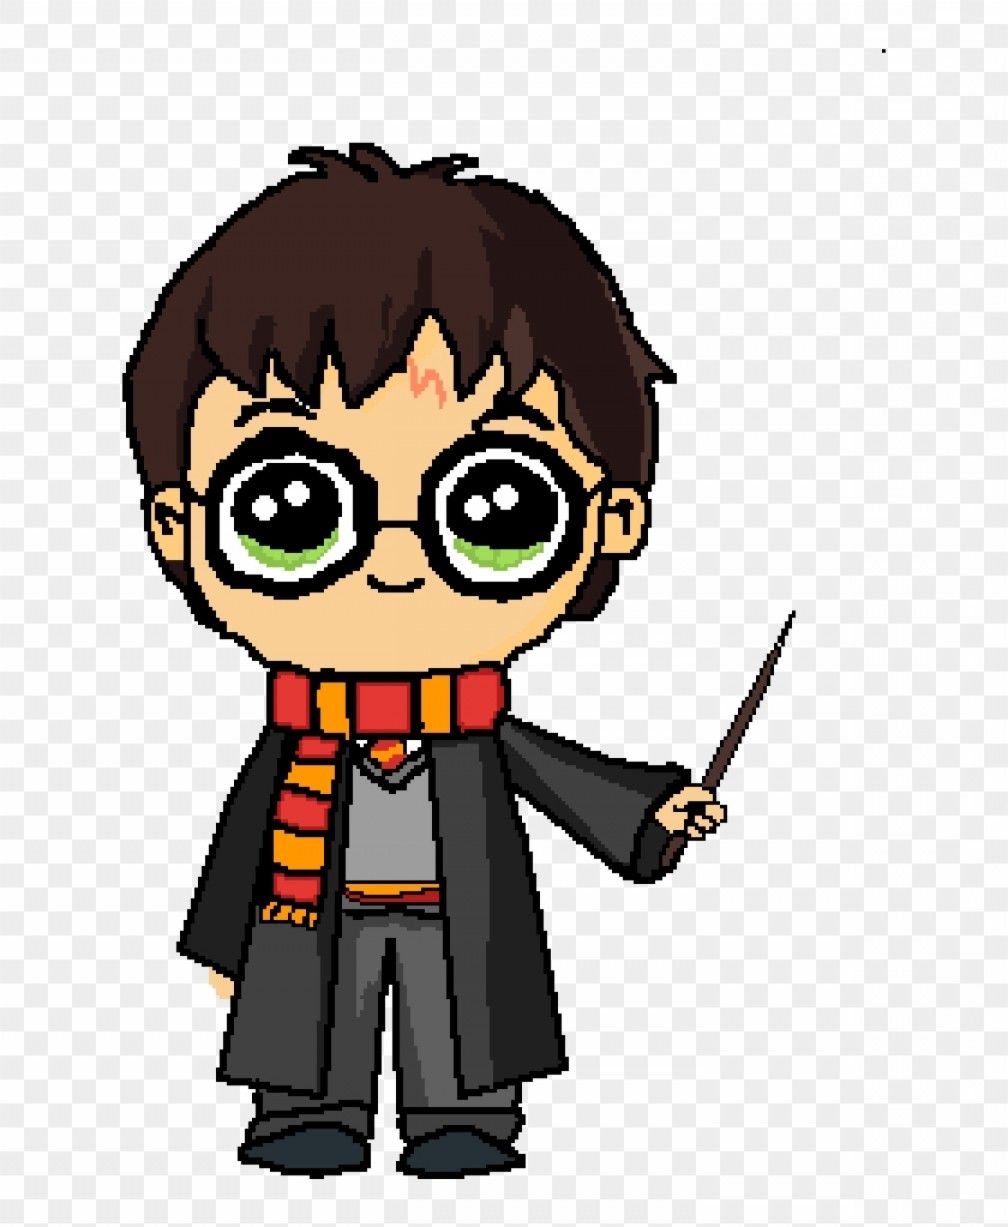 0 Result Images of Harry Potter Characters Wallpaper Cartoon - PNG ...